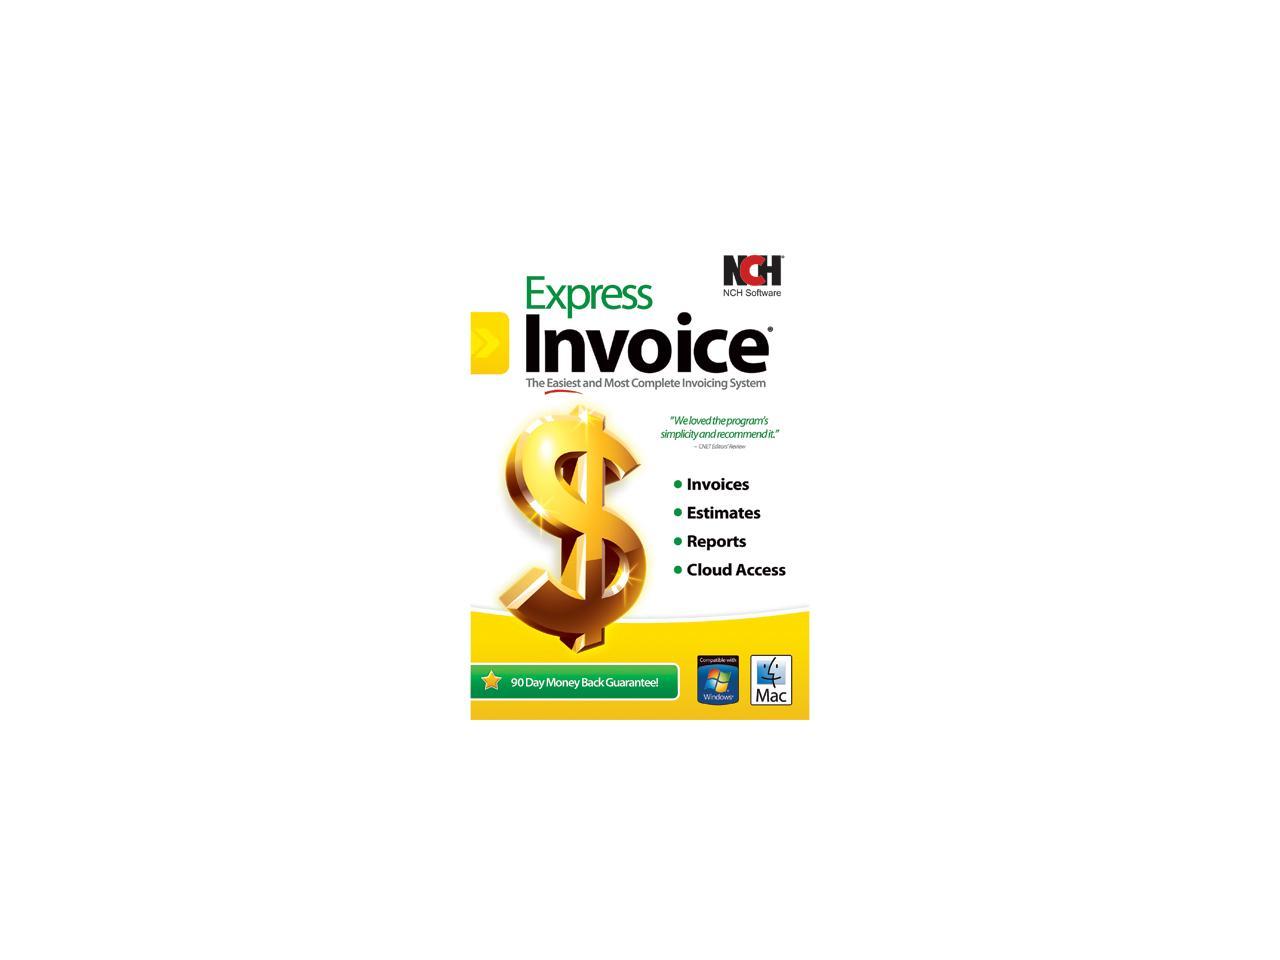 nch software express invoice crack